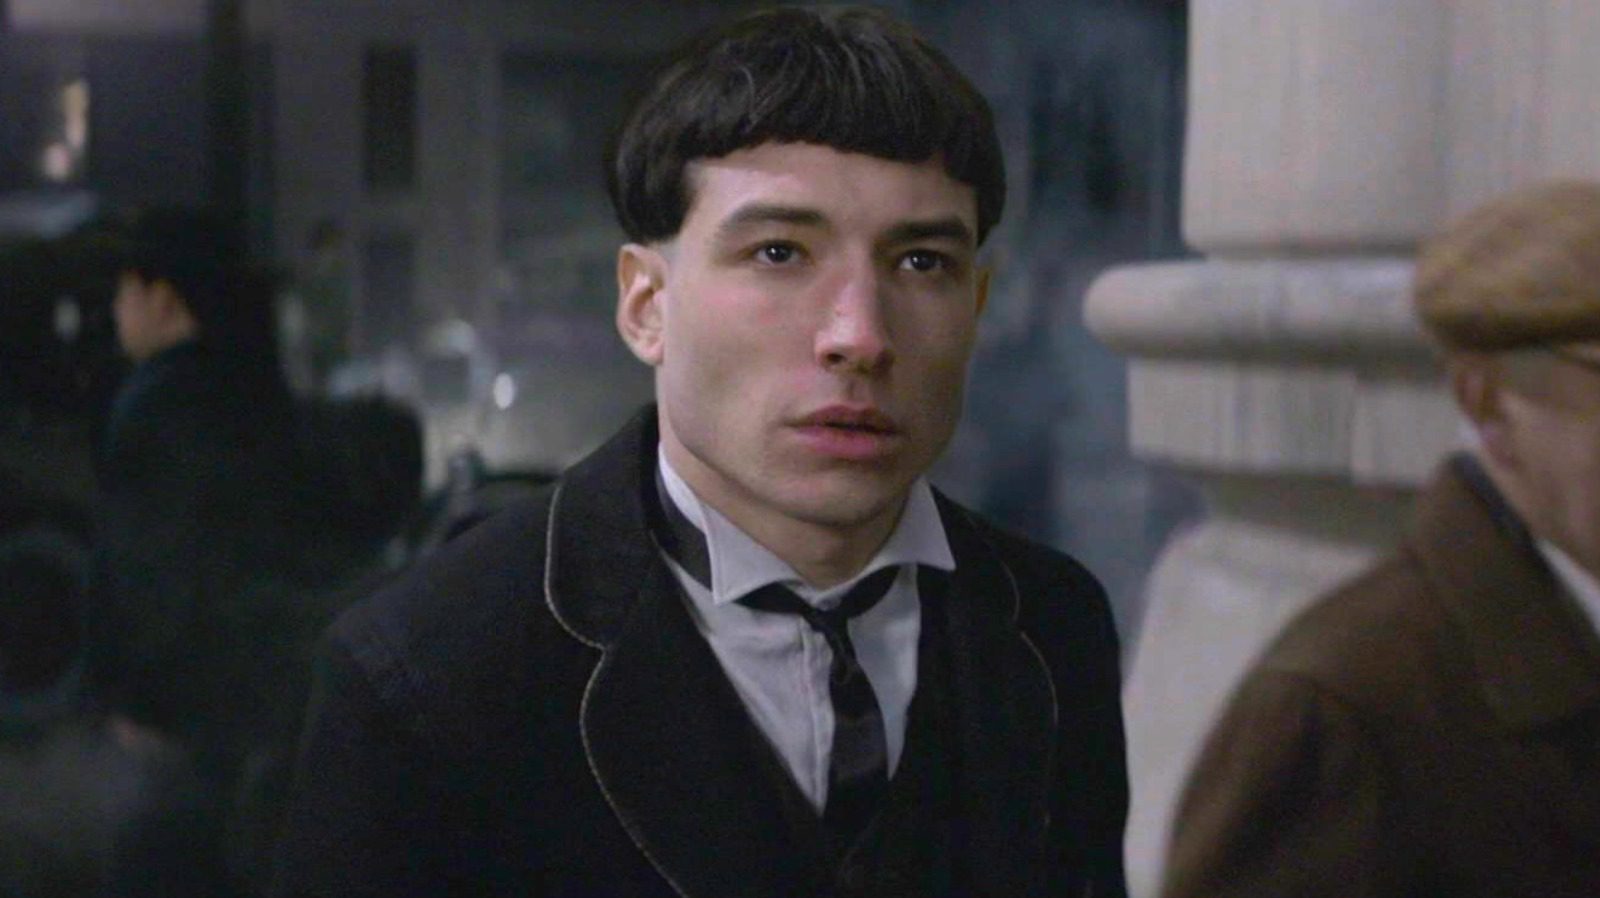 Why Isn't Harry Potter An Obscurial Like Credence?